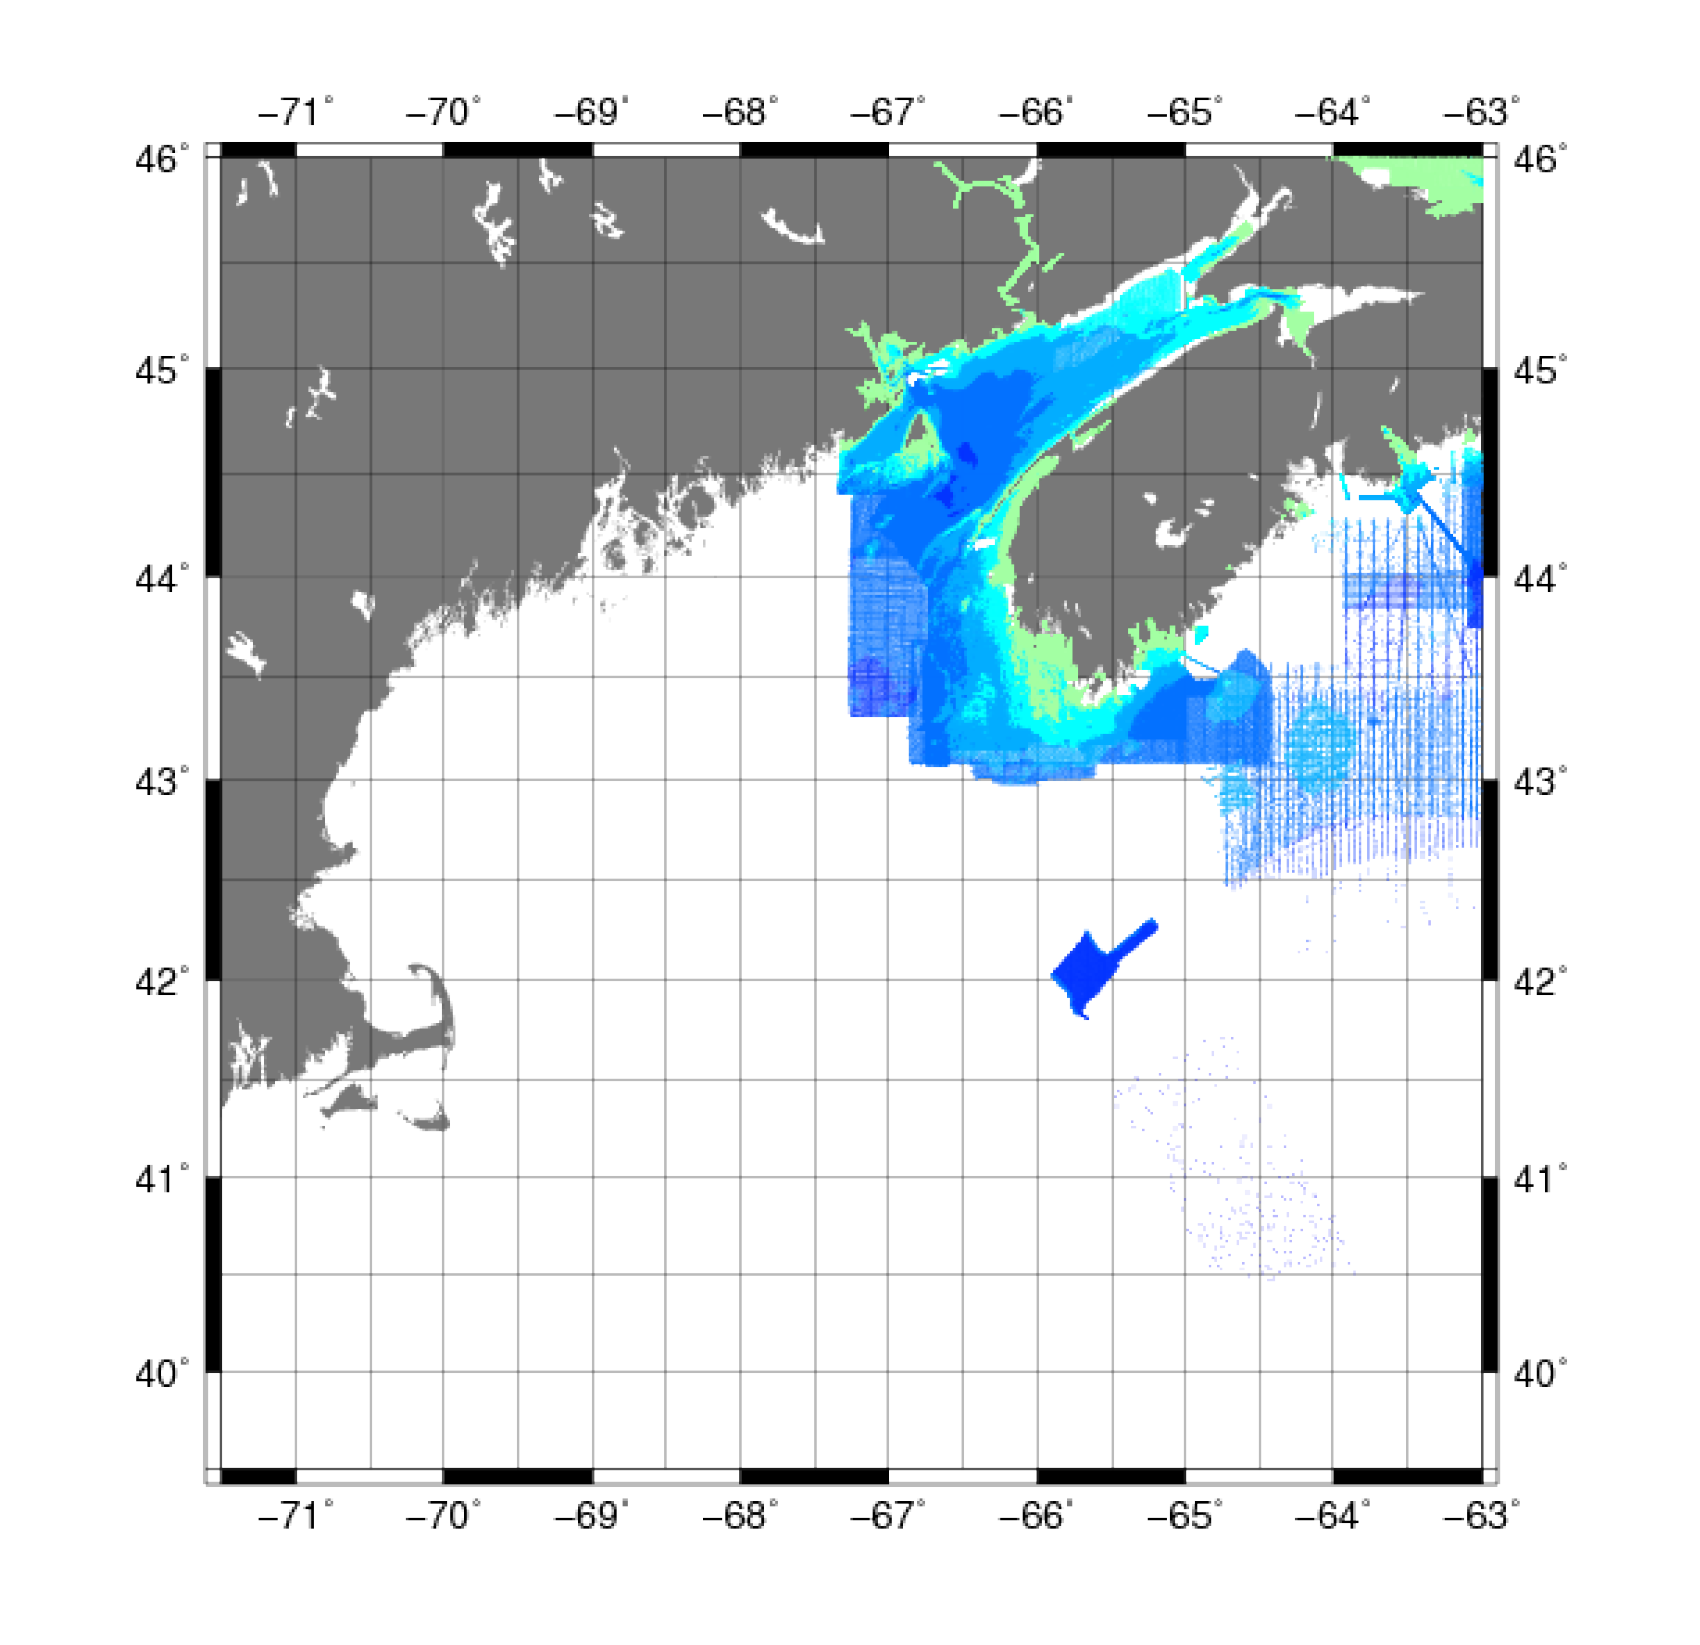 thumbnail image and link to larger image of a map showing northwest atlantic canadian hydrographic survey atlantic data